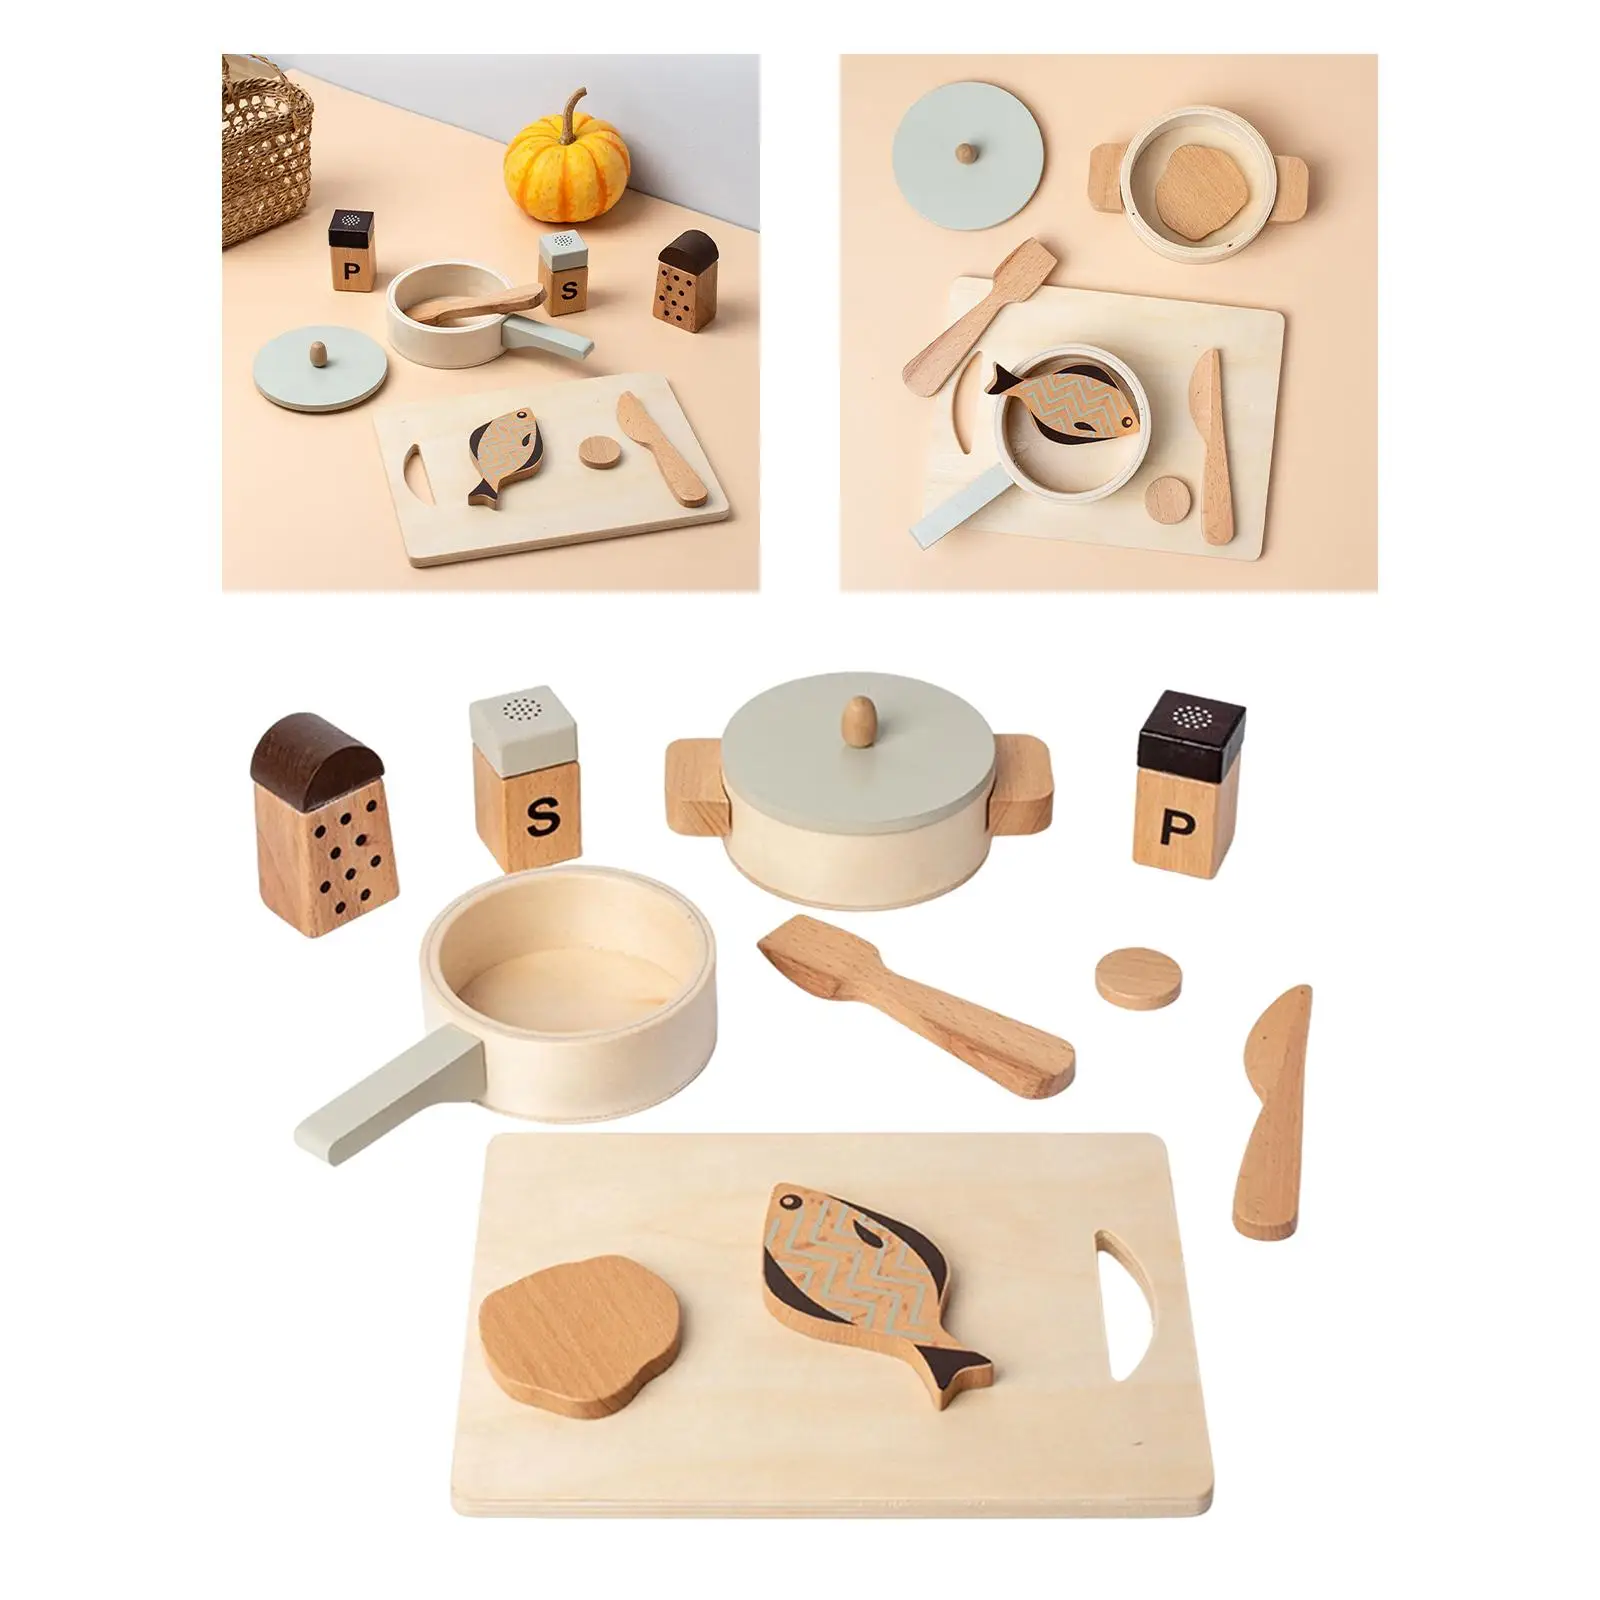 Wooden Kitchen Playset Pretend Toy Set Chopping Board for Girls Boys